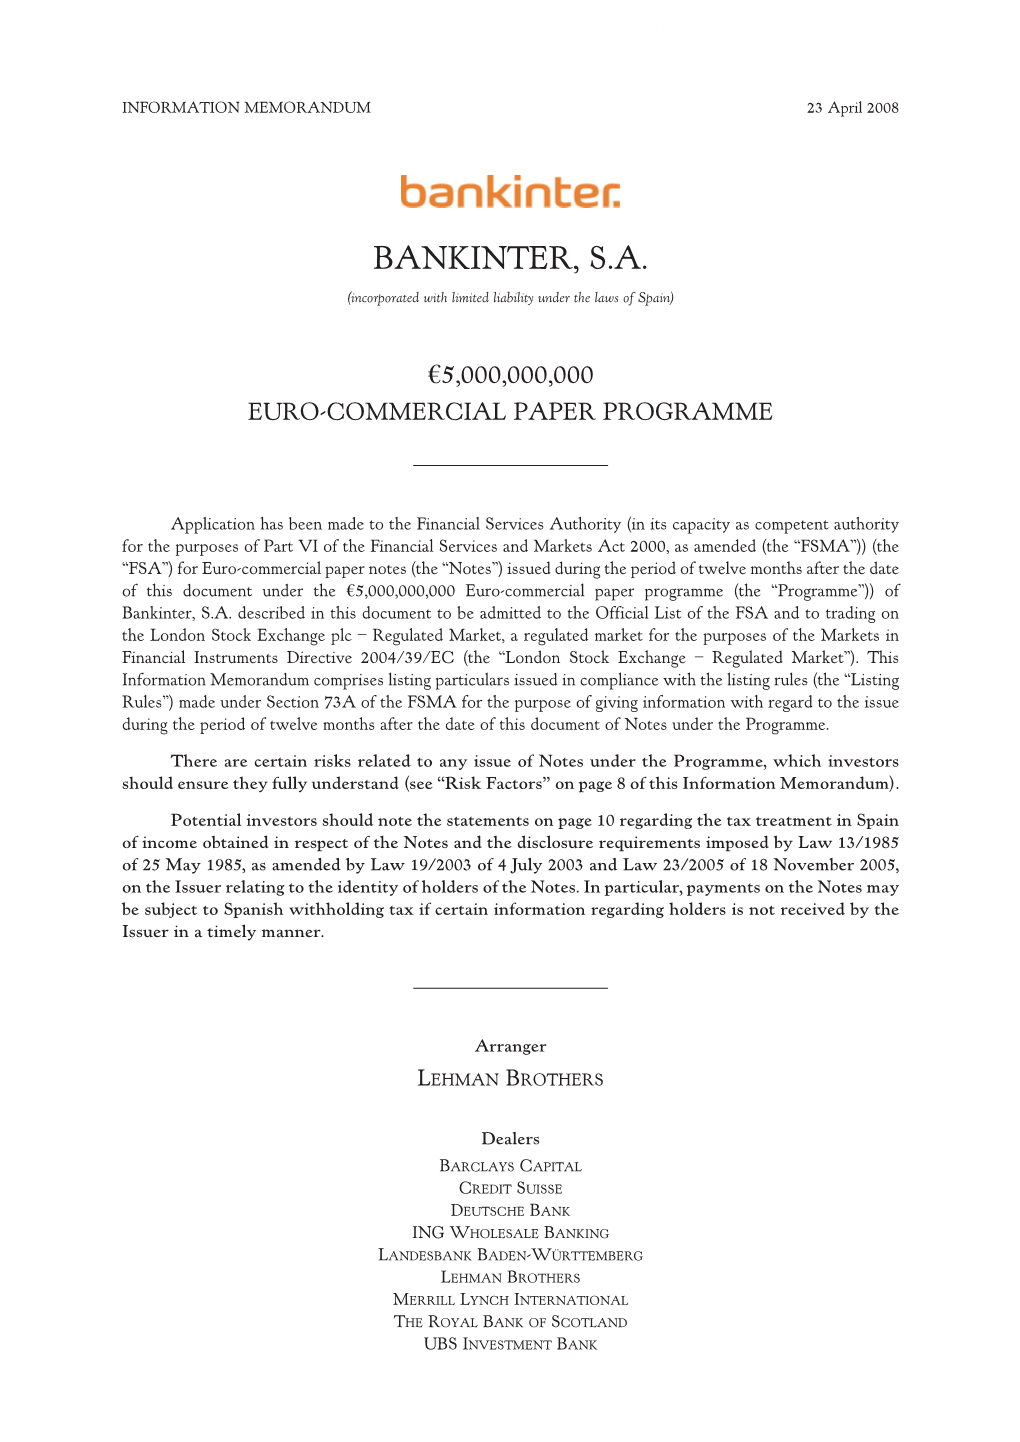 BANKINTER, S.A. (Incorporated with Limited Liability Under the Laws of Spain)